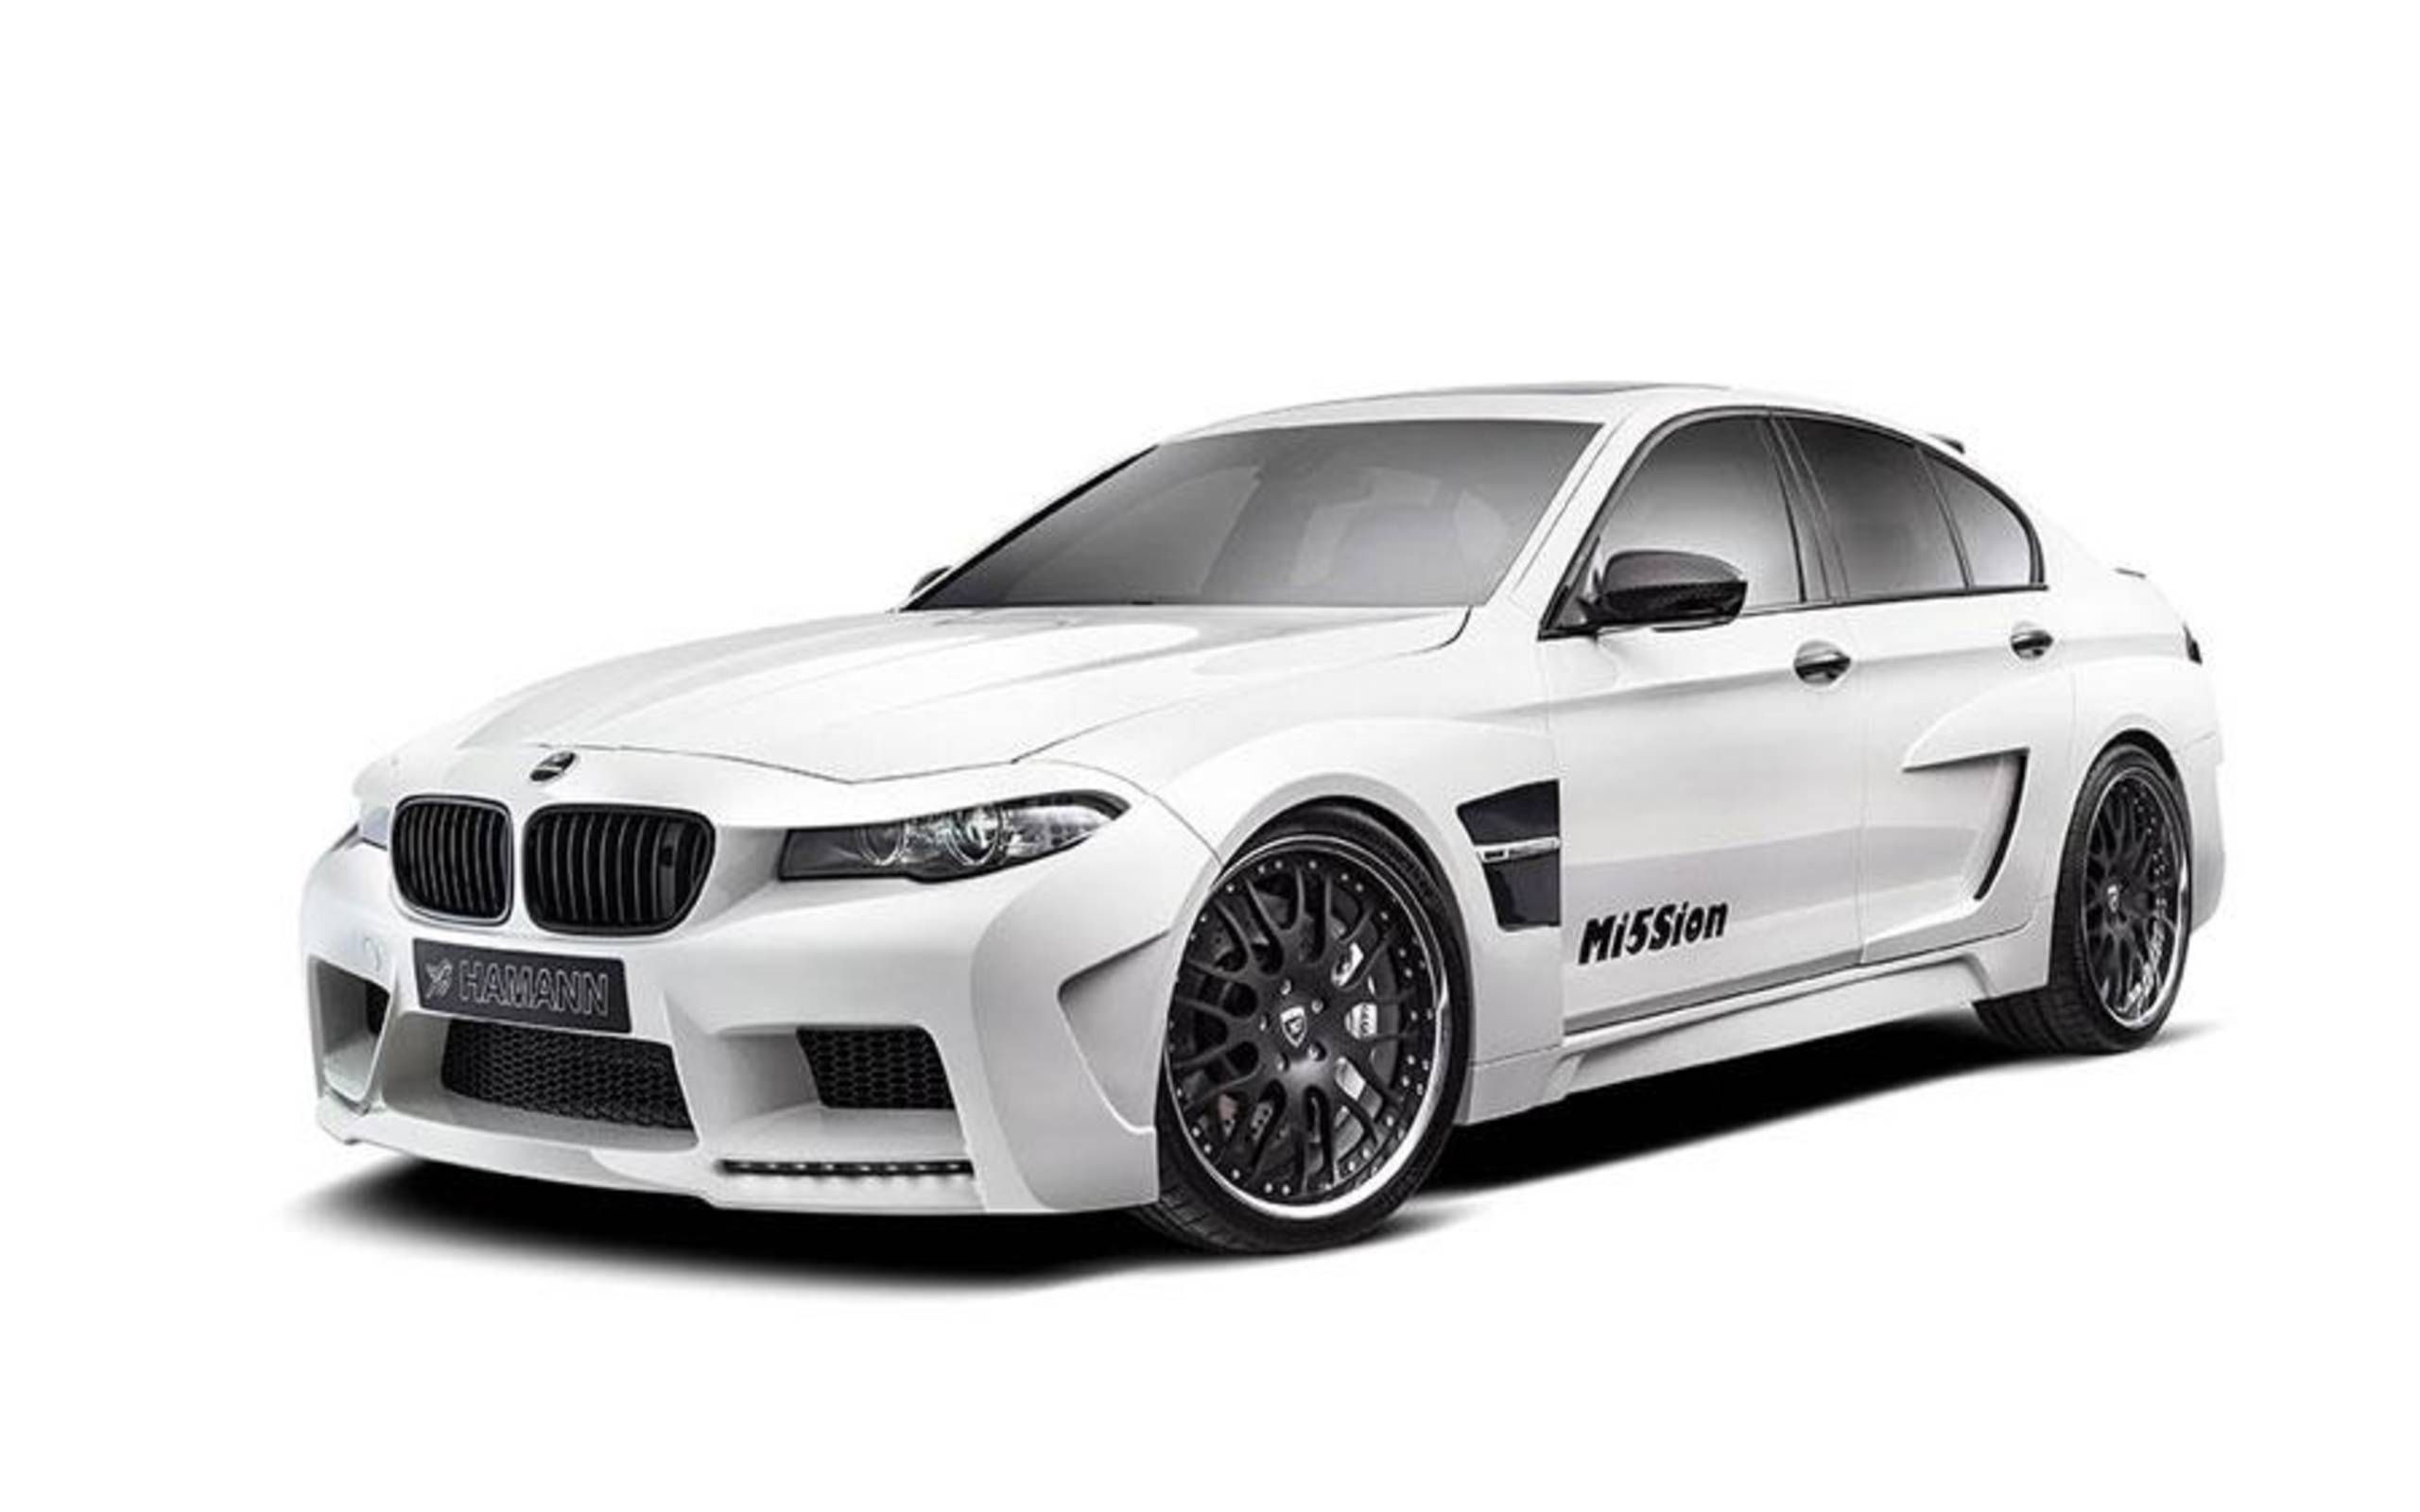 Hamann BMW M5 F10 - It's not tuning, It is styling